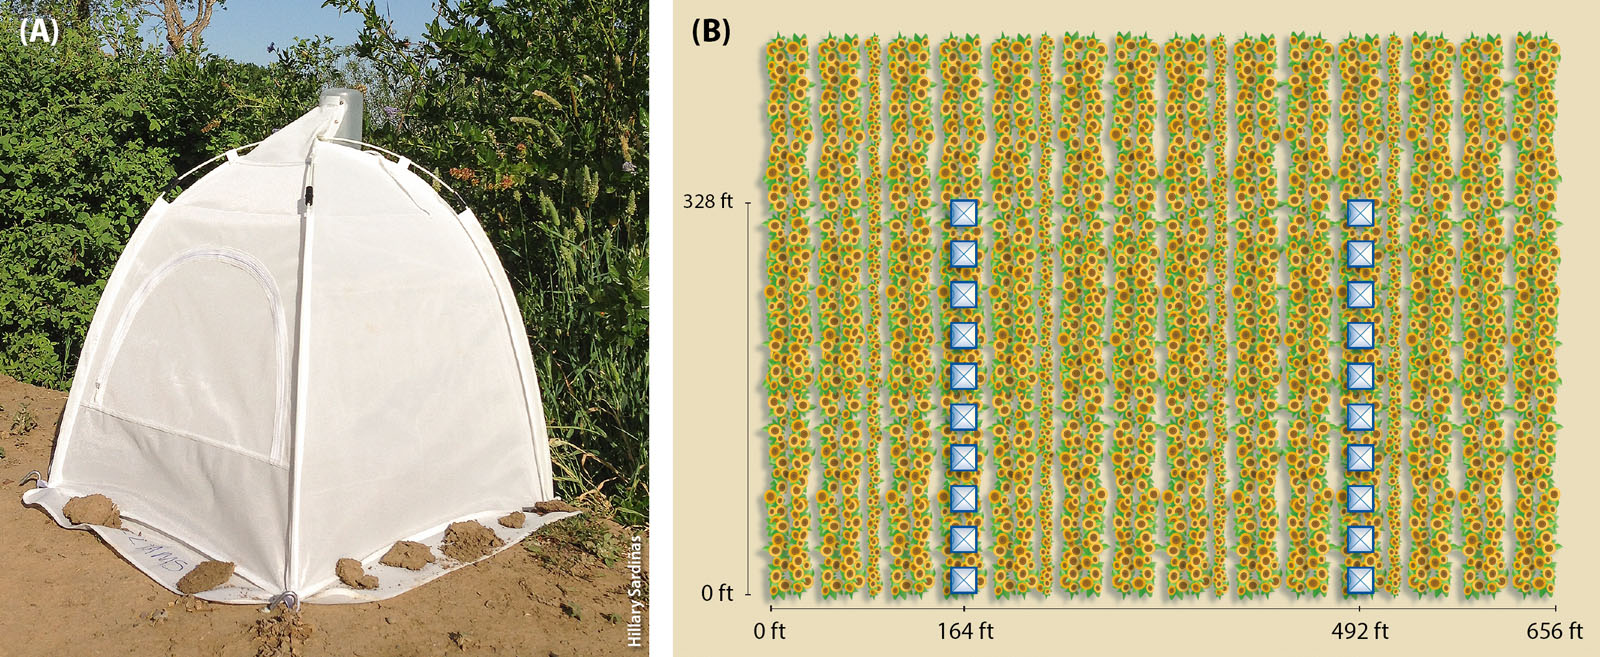 Emergence traps (A) were used to collect bees nesting in sunflower fields and were placed along two parallel transects (B) running 328 feet into the fields. Transects were located 164 feet from field edges and 328 feet apart. Ten traps (white boxes, B), 32.8 feet apart, were placed along each transect.